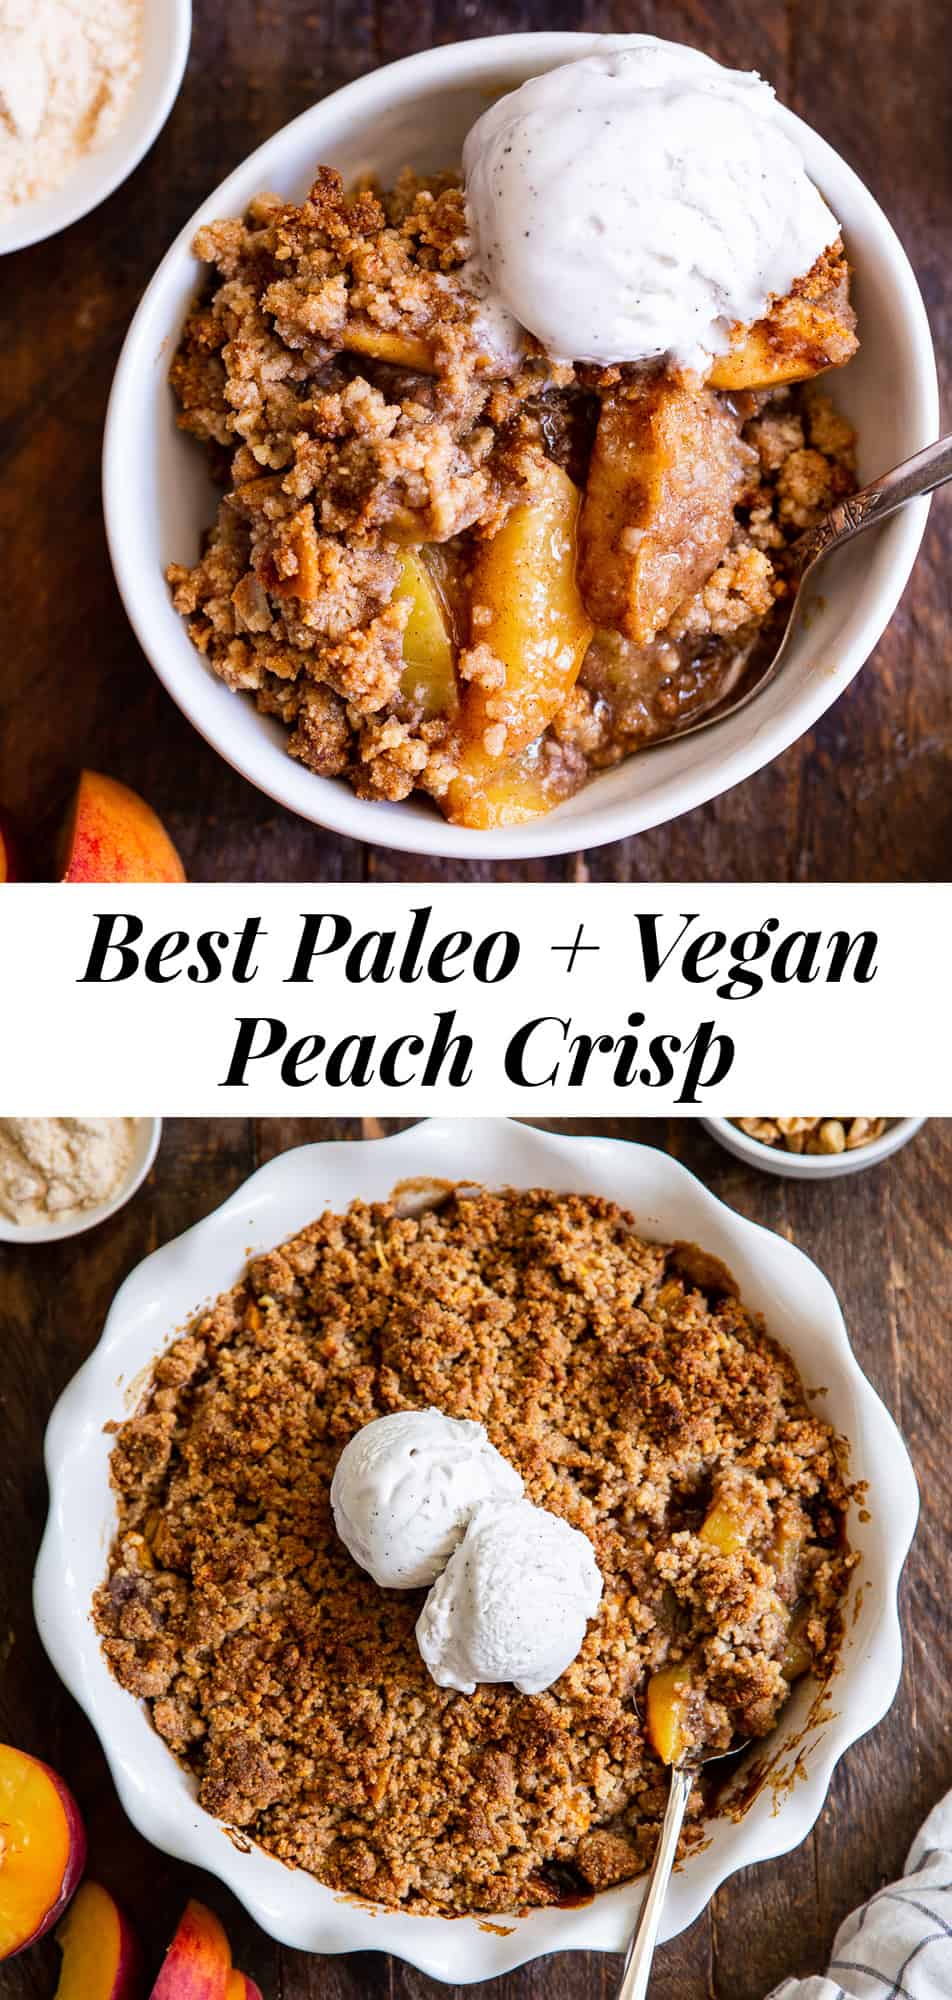 This paleo peach crisp has a juicy sweet peach filling with a toasty crisp topping that’s out of this world delicious! It’s truly the best peach crisp you’ll ever make. A fast family favorite for peach season, this crisp is paleo, vegan and gluten free. #paleo #dessert #peaches #vegan #cleaneating #glutenfreebaking 